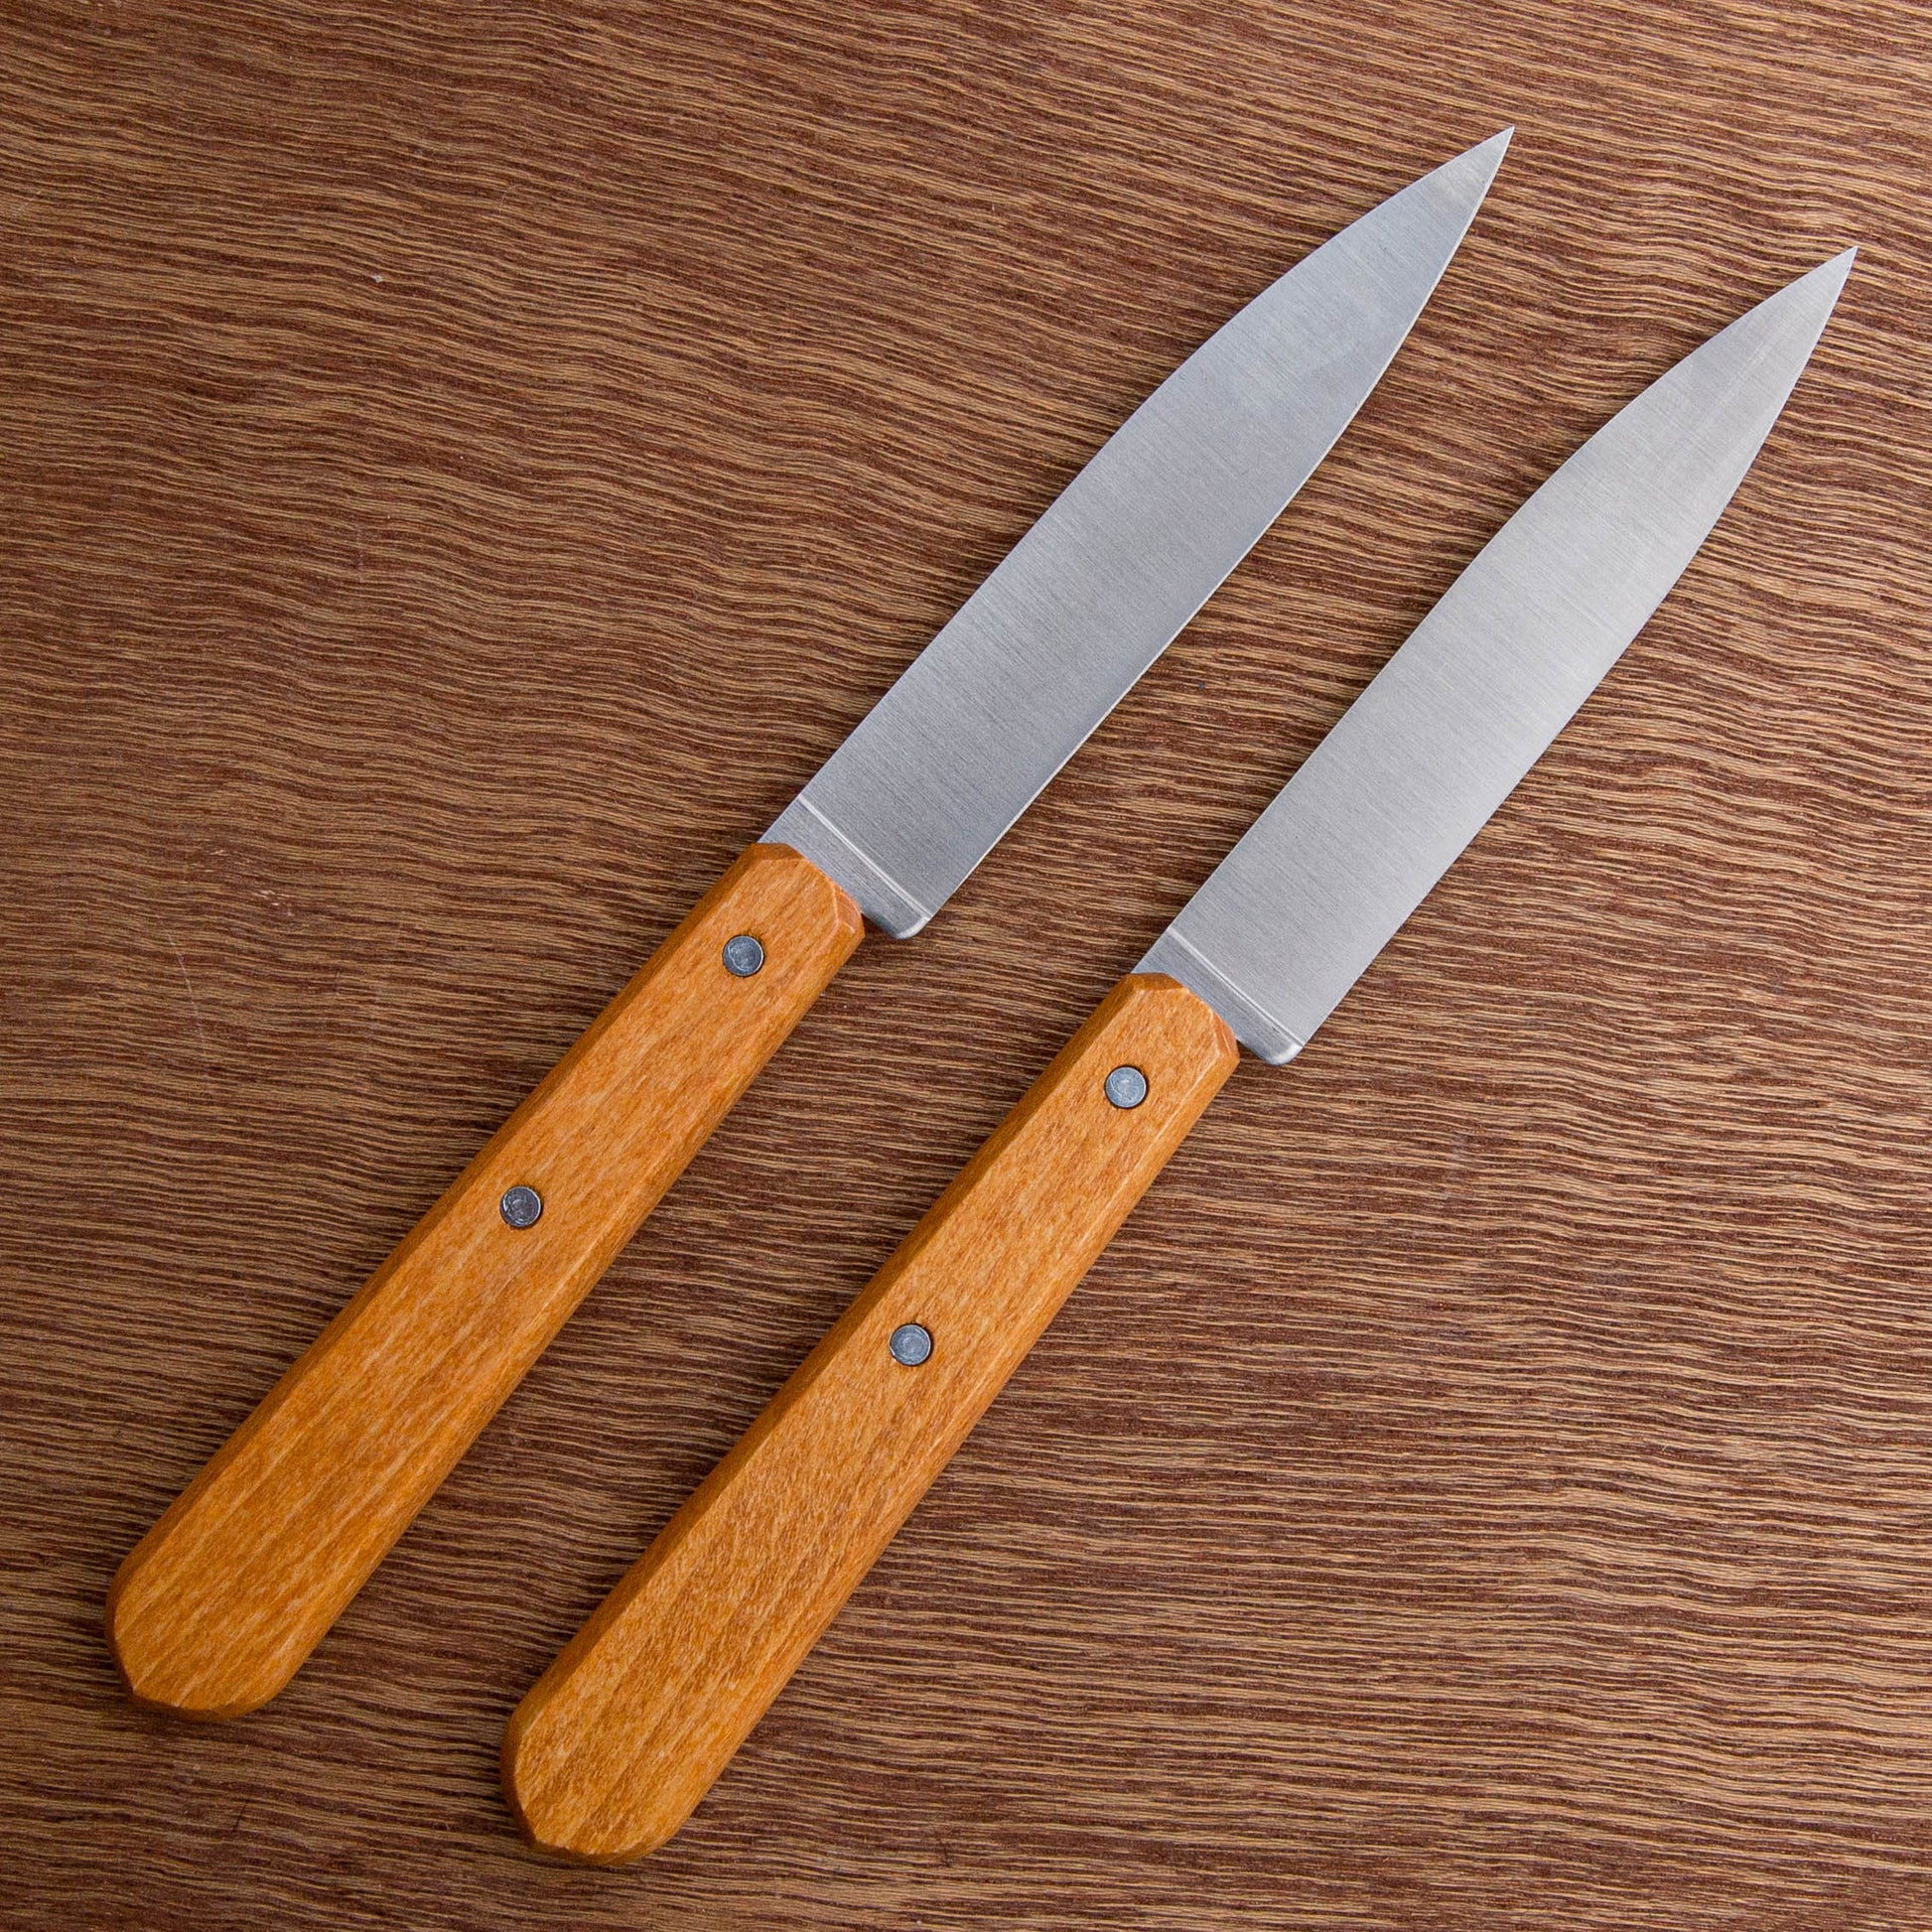 Opinel No.112 Paring Knife